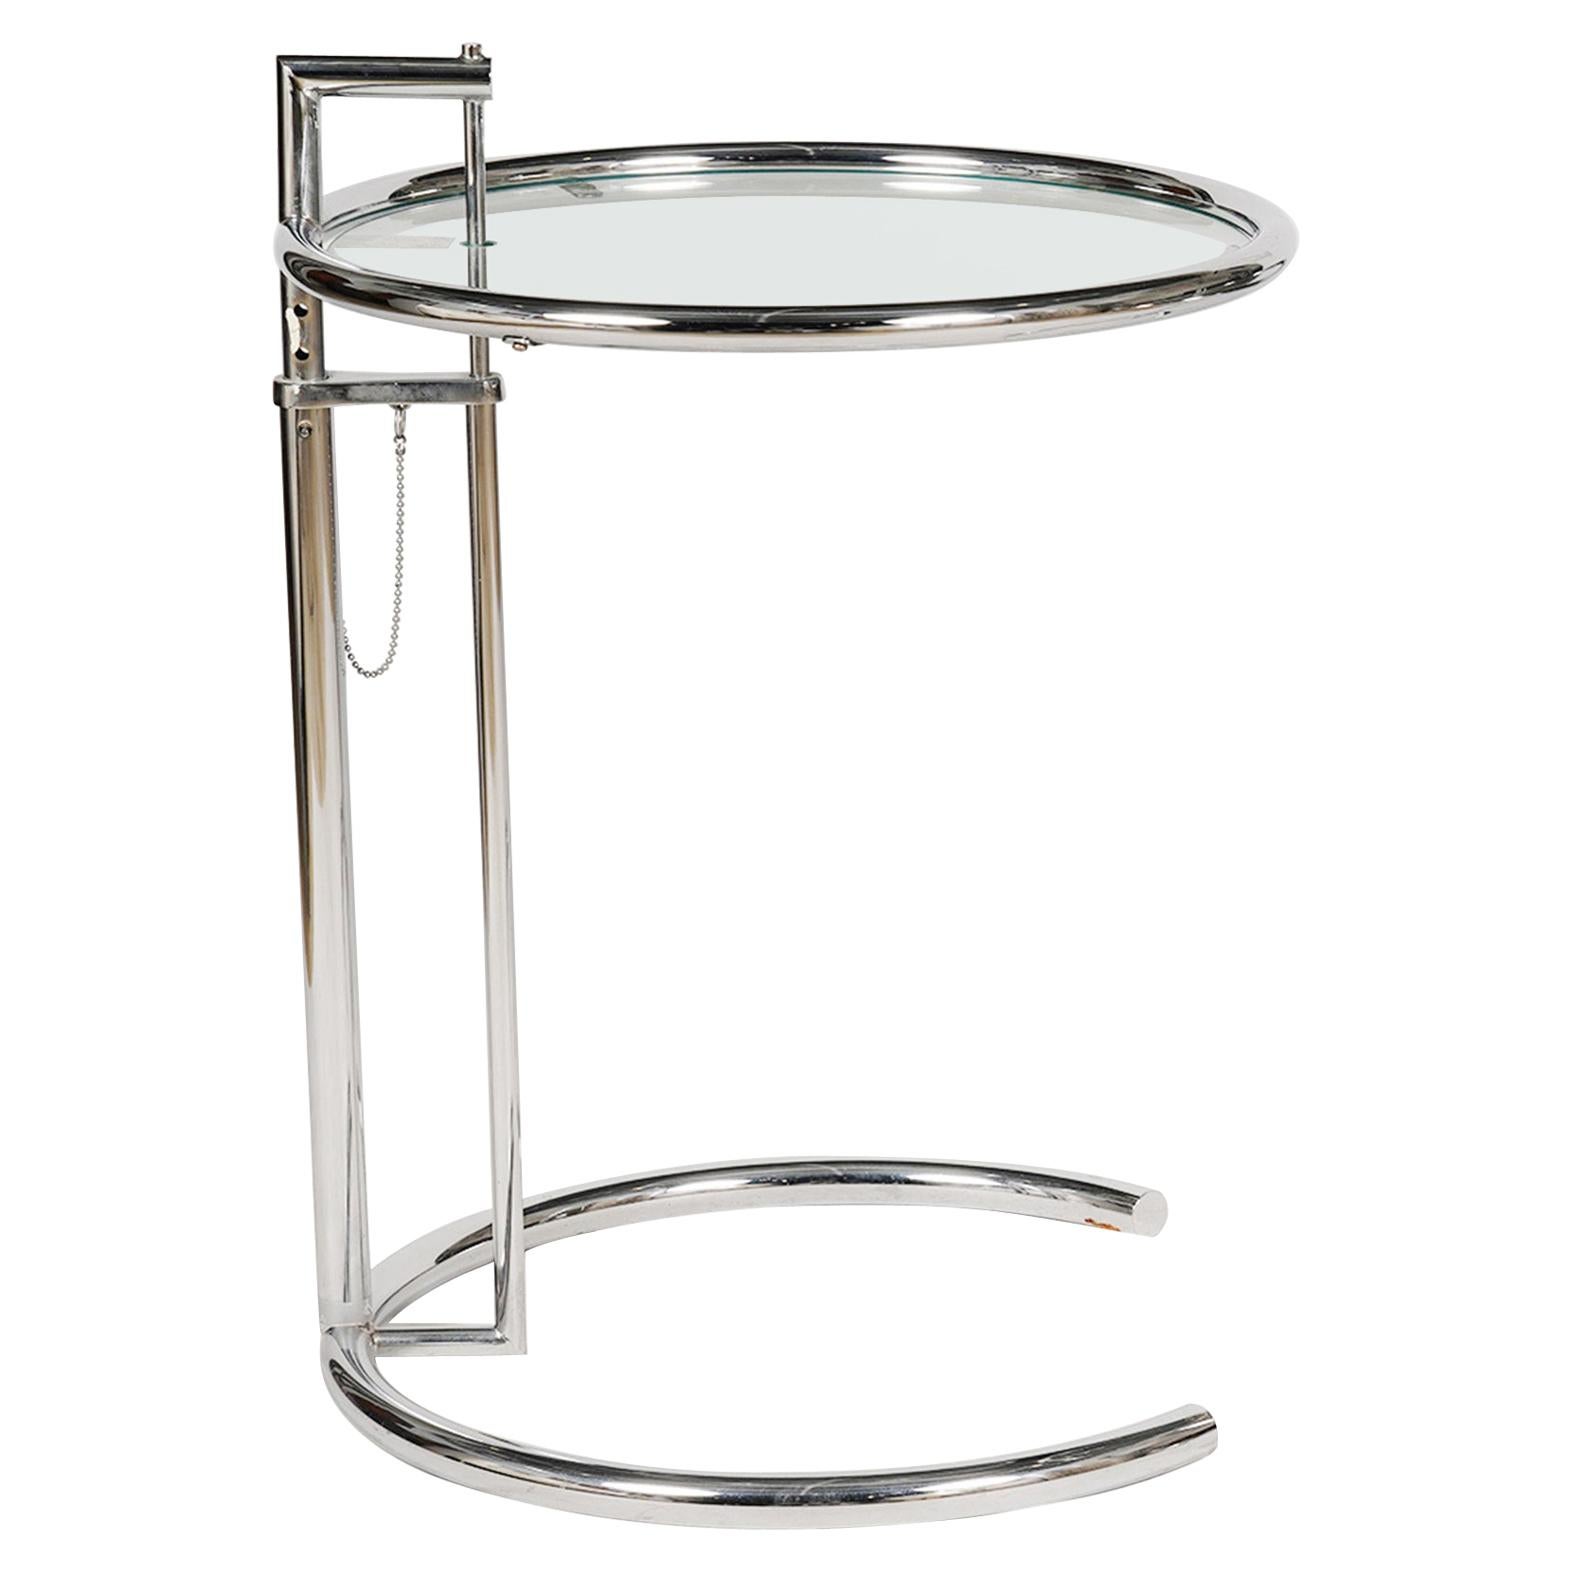 Iconic Eileen Gray E1027 Adjustable Round Chrome and Glass Side Table